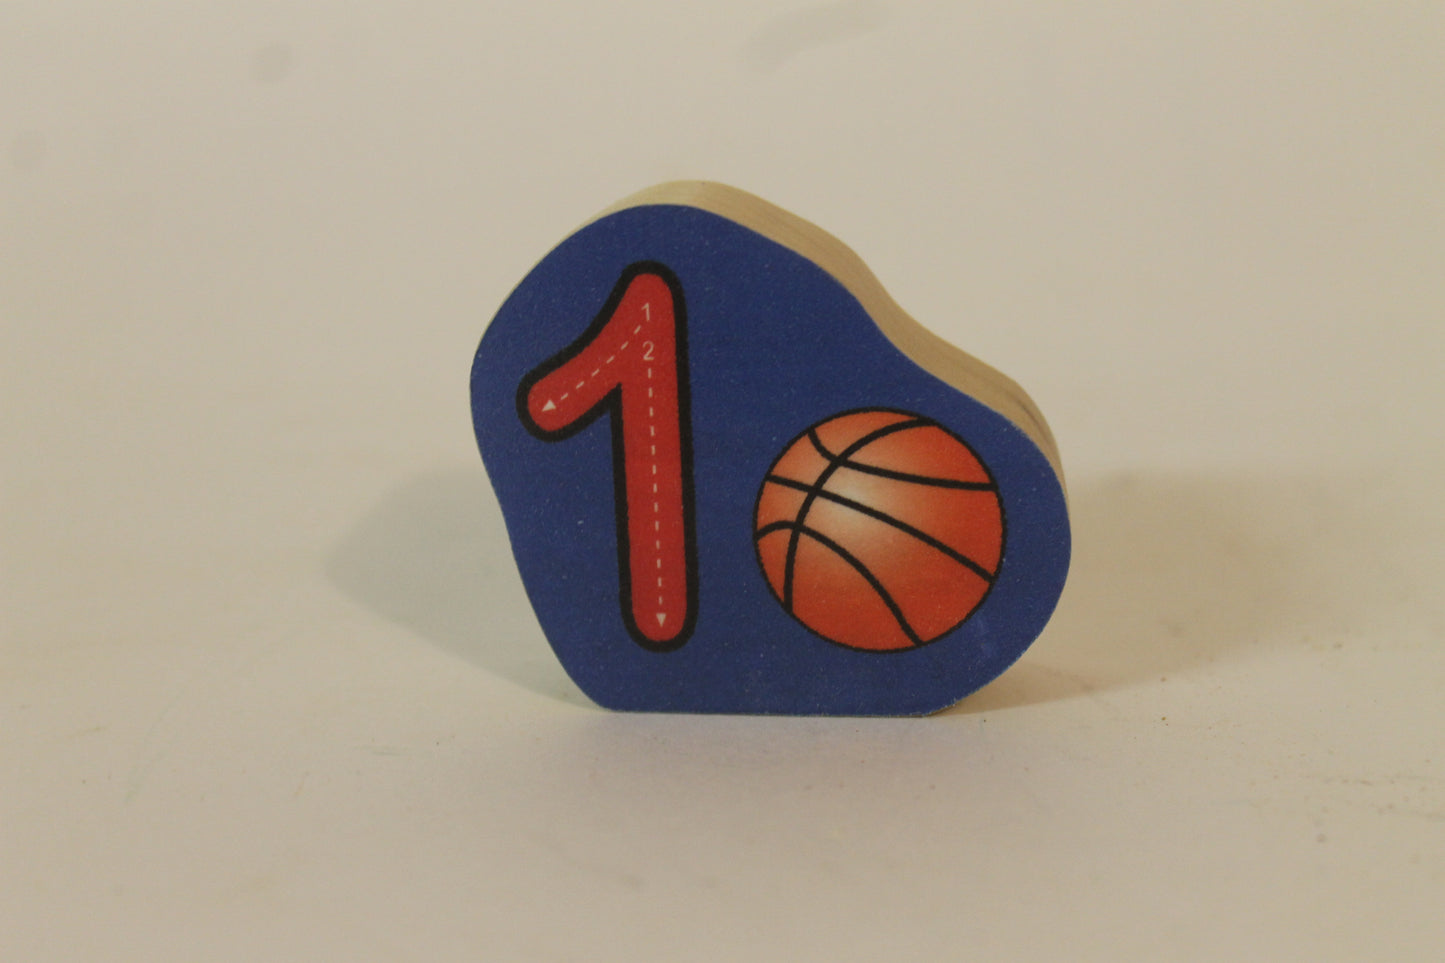 Child's set of blocks for learning numbers